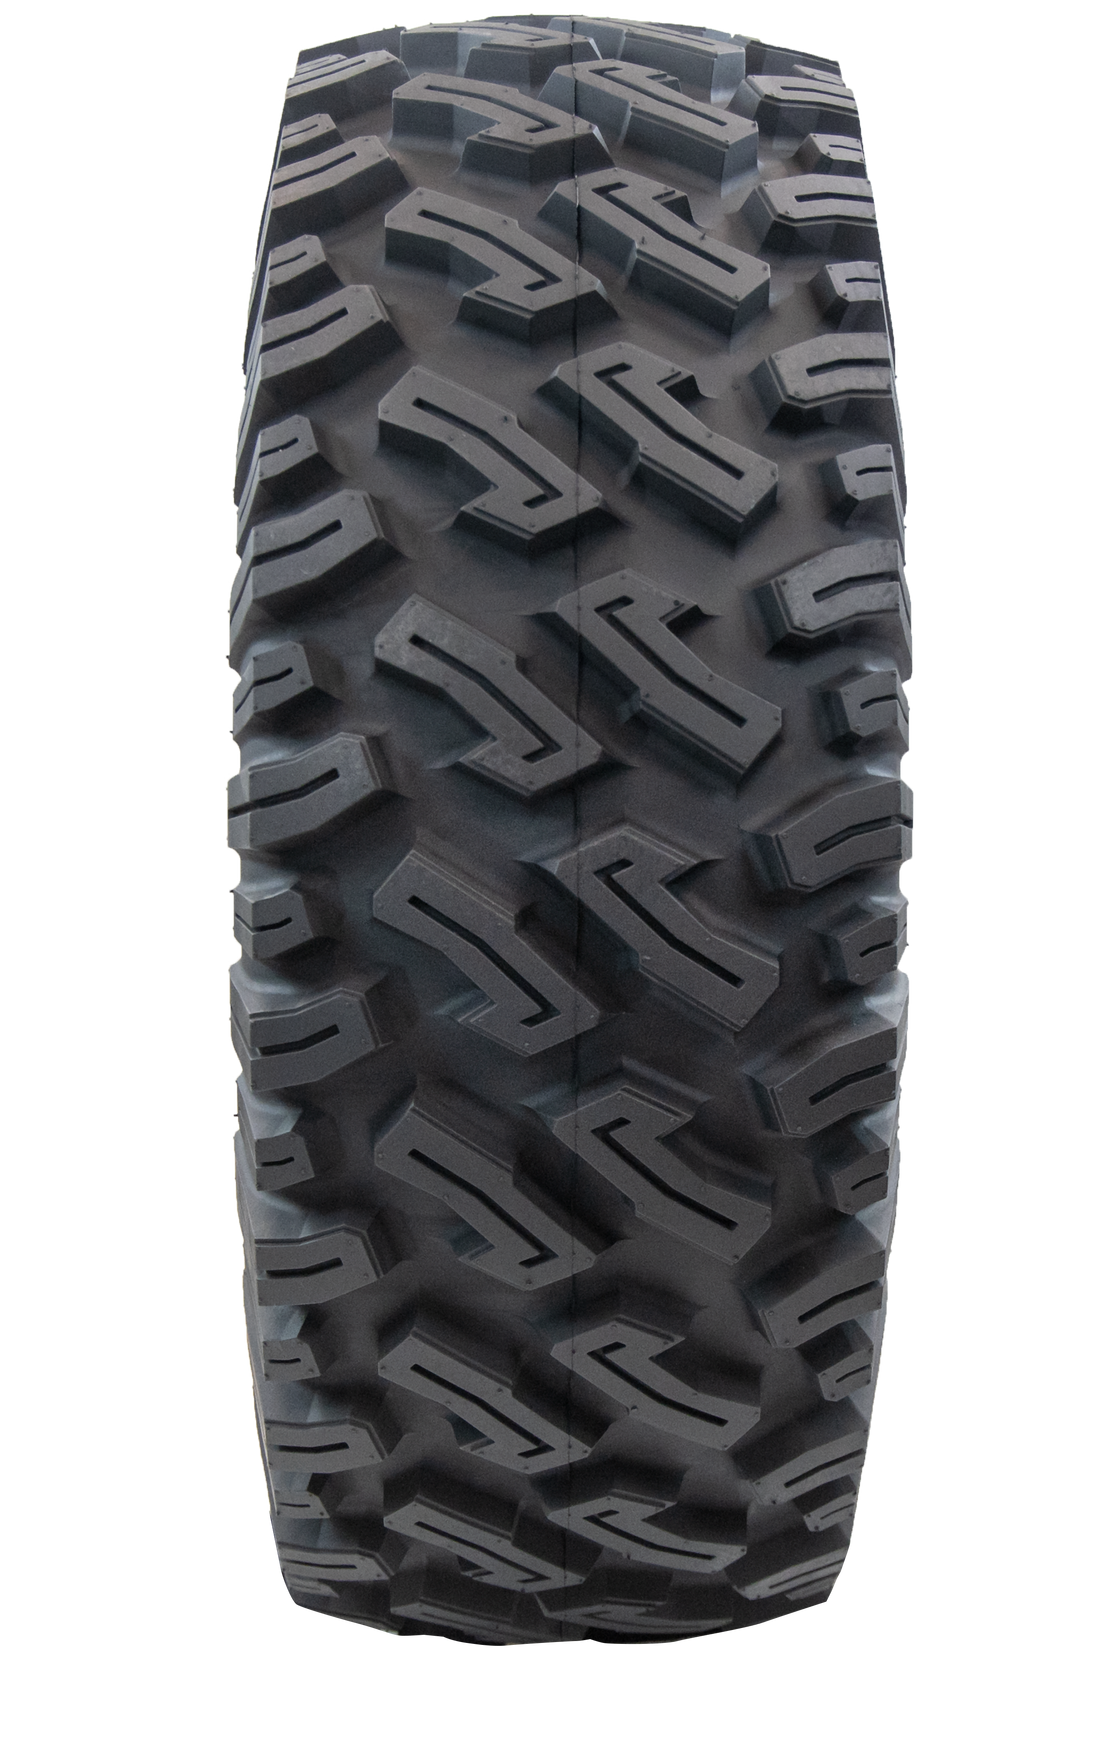 Full frontal view of Dirt Commander 2.0 ATV/UTV tire, revealing its full-coverage L-shaped tread block pattern. The image highlights the tire's flatter profile across the tread face, allowing for maximum acceleration and braking power, assuring reliable performance in diverse terrains.